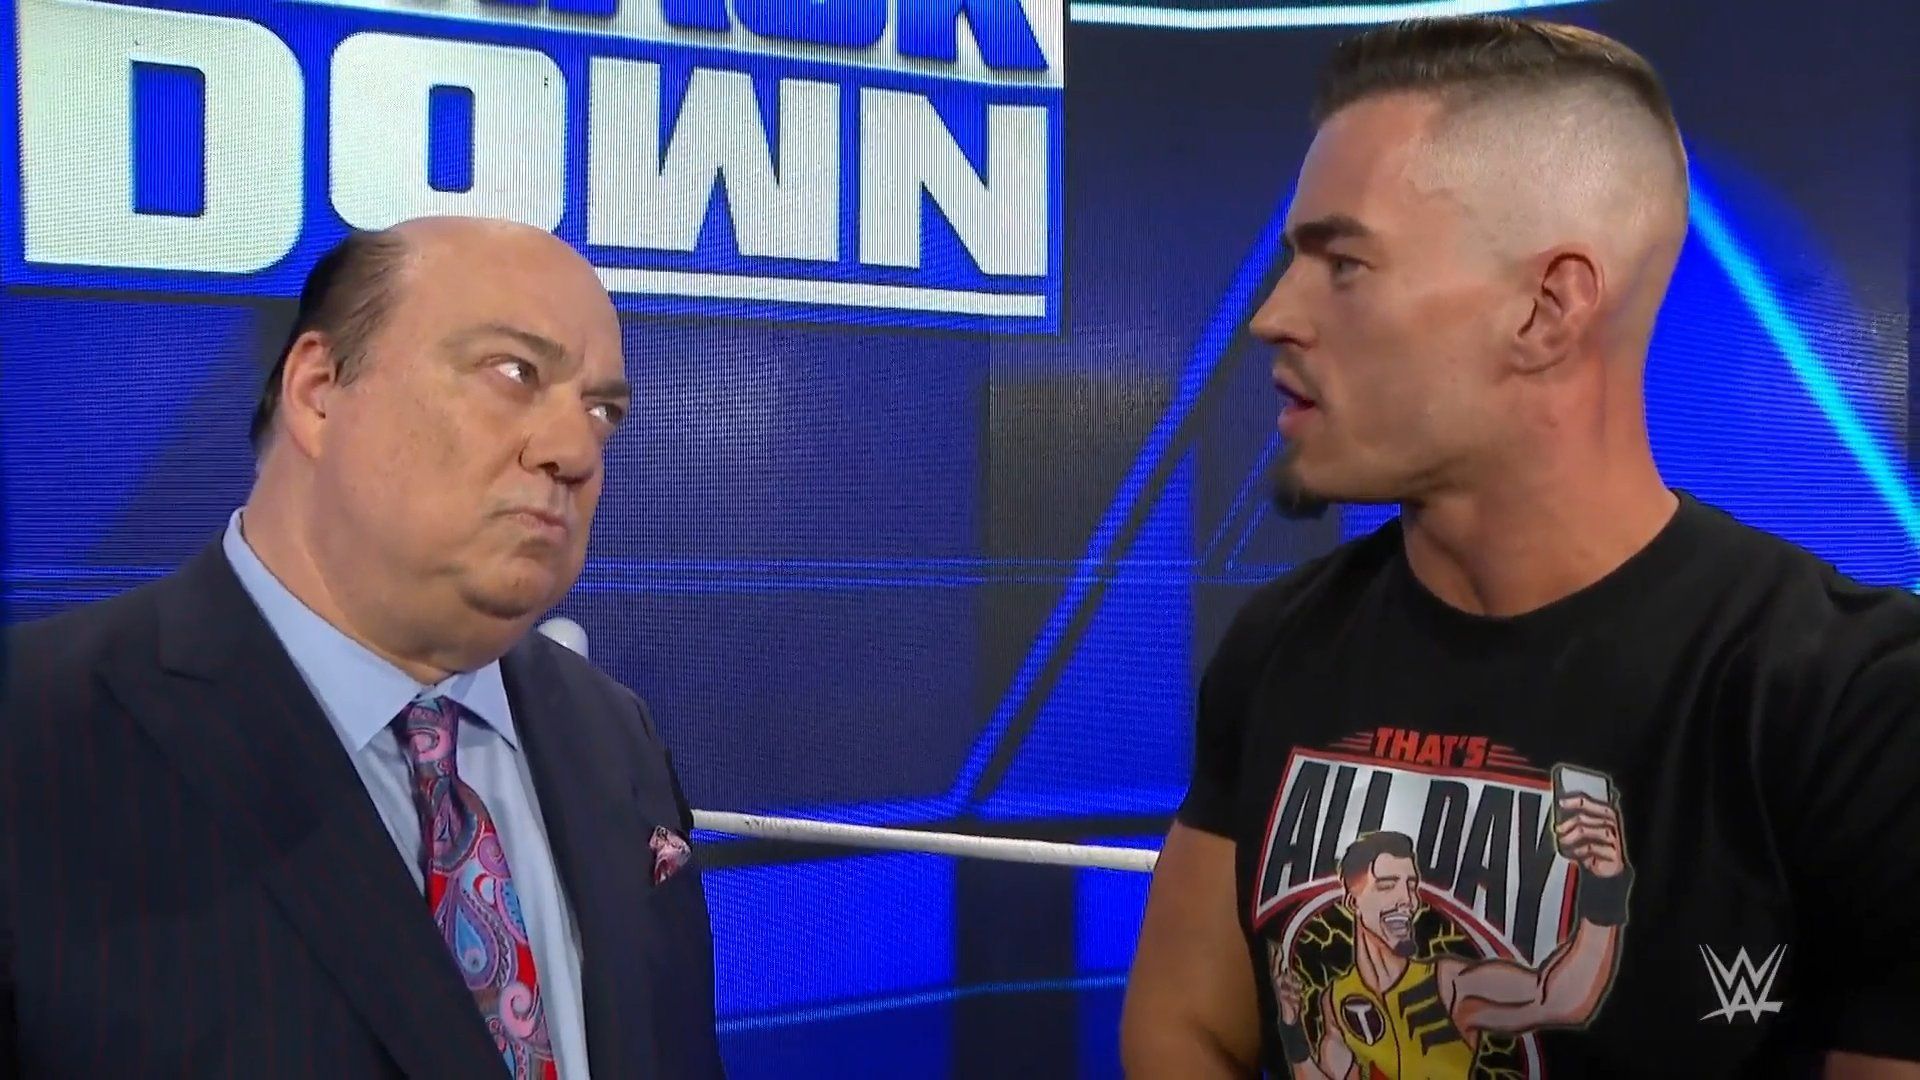 Paul Heyman failed to make a deal with Theory on WWE SmackDown